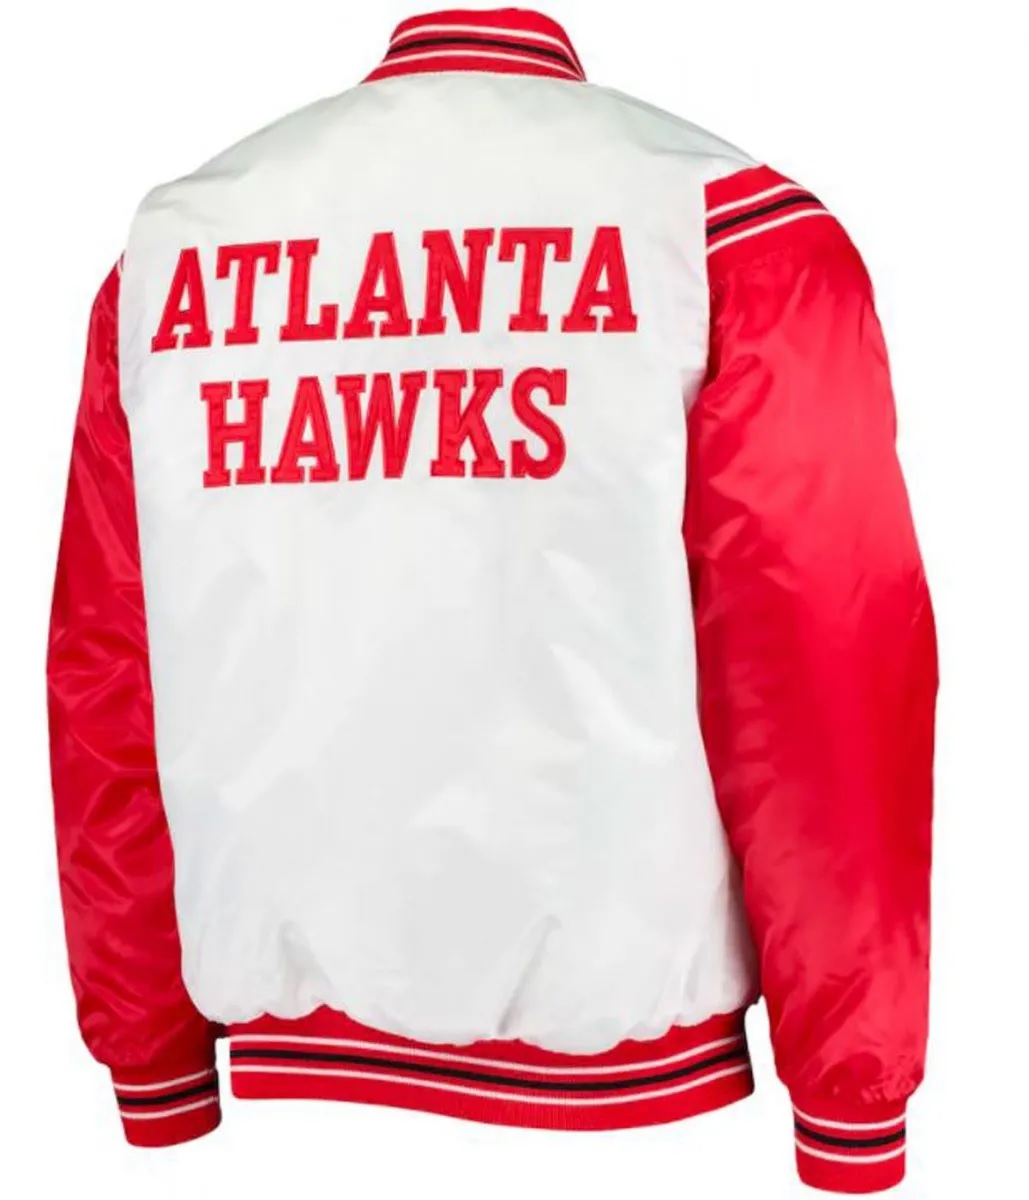 Atlanta Hawks Bomber Red and White Satin Jacket. perfect for game nights and city strolls.this satin bomber jacket blends team spirit with urban style